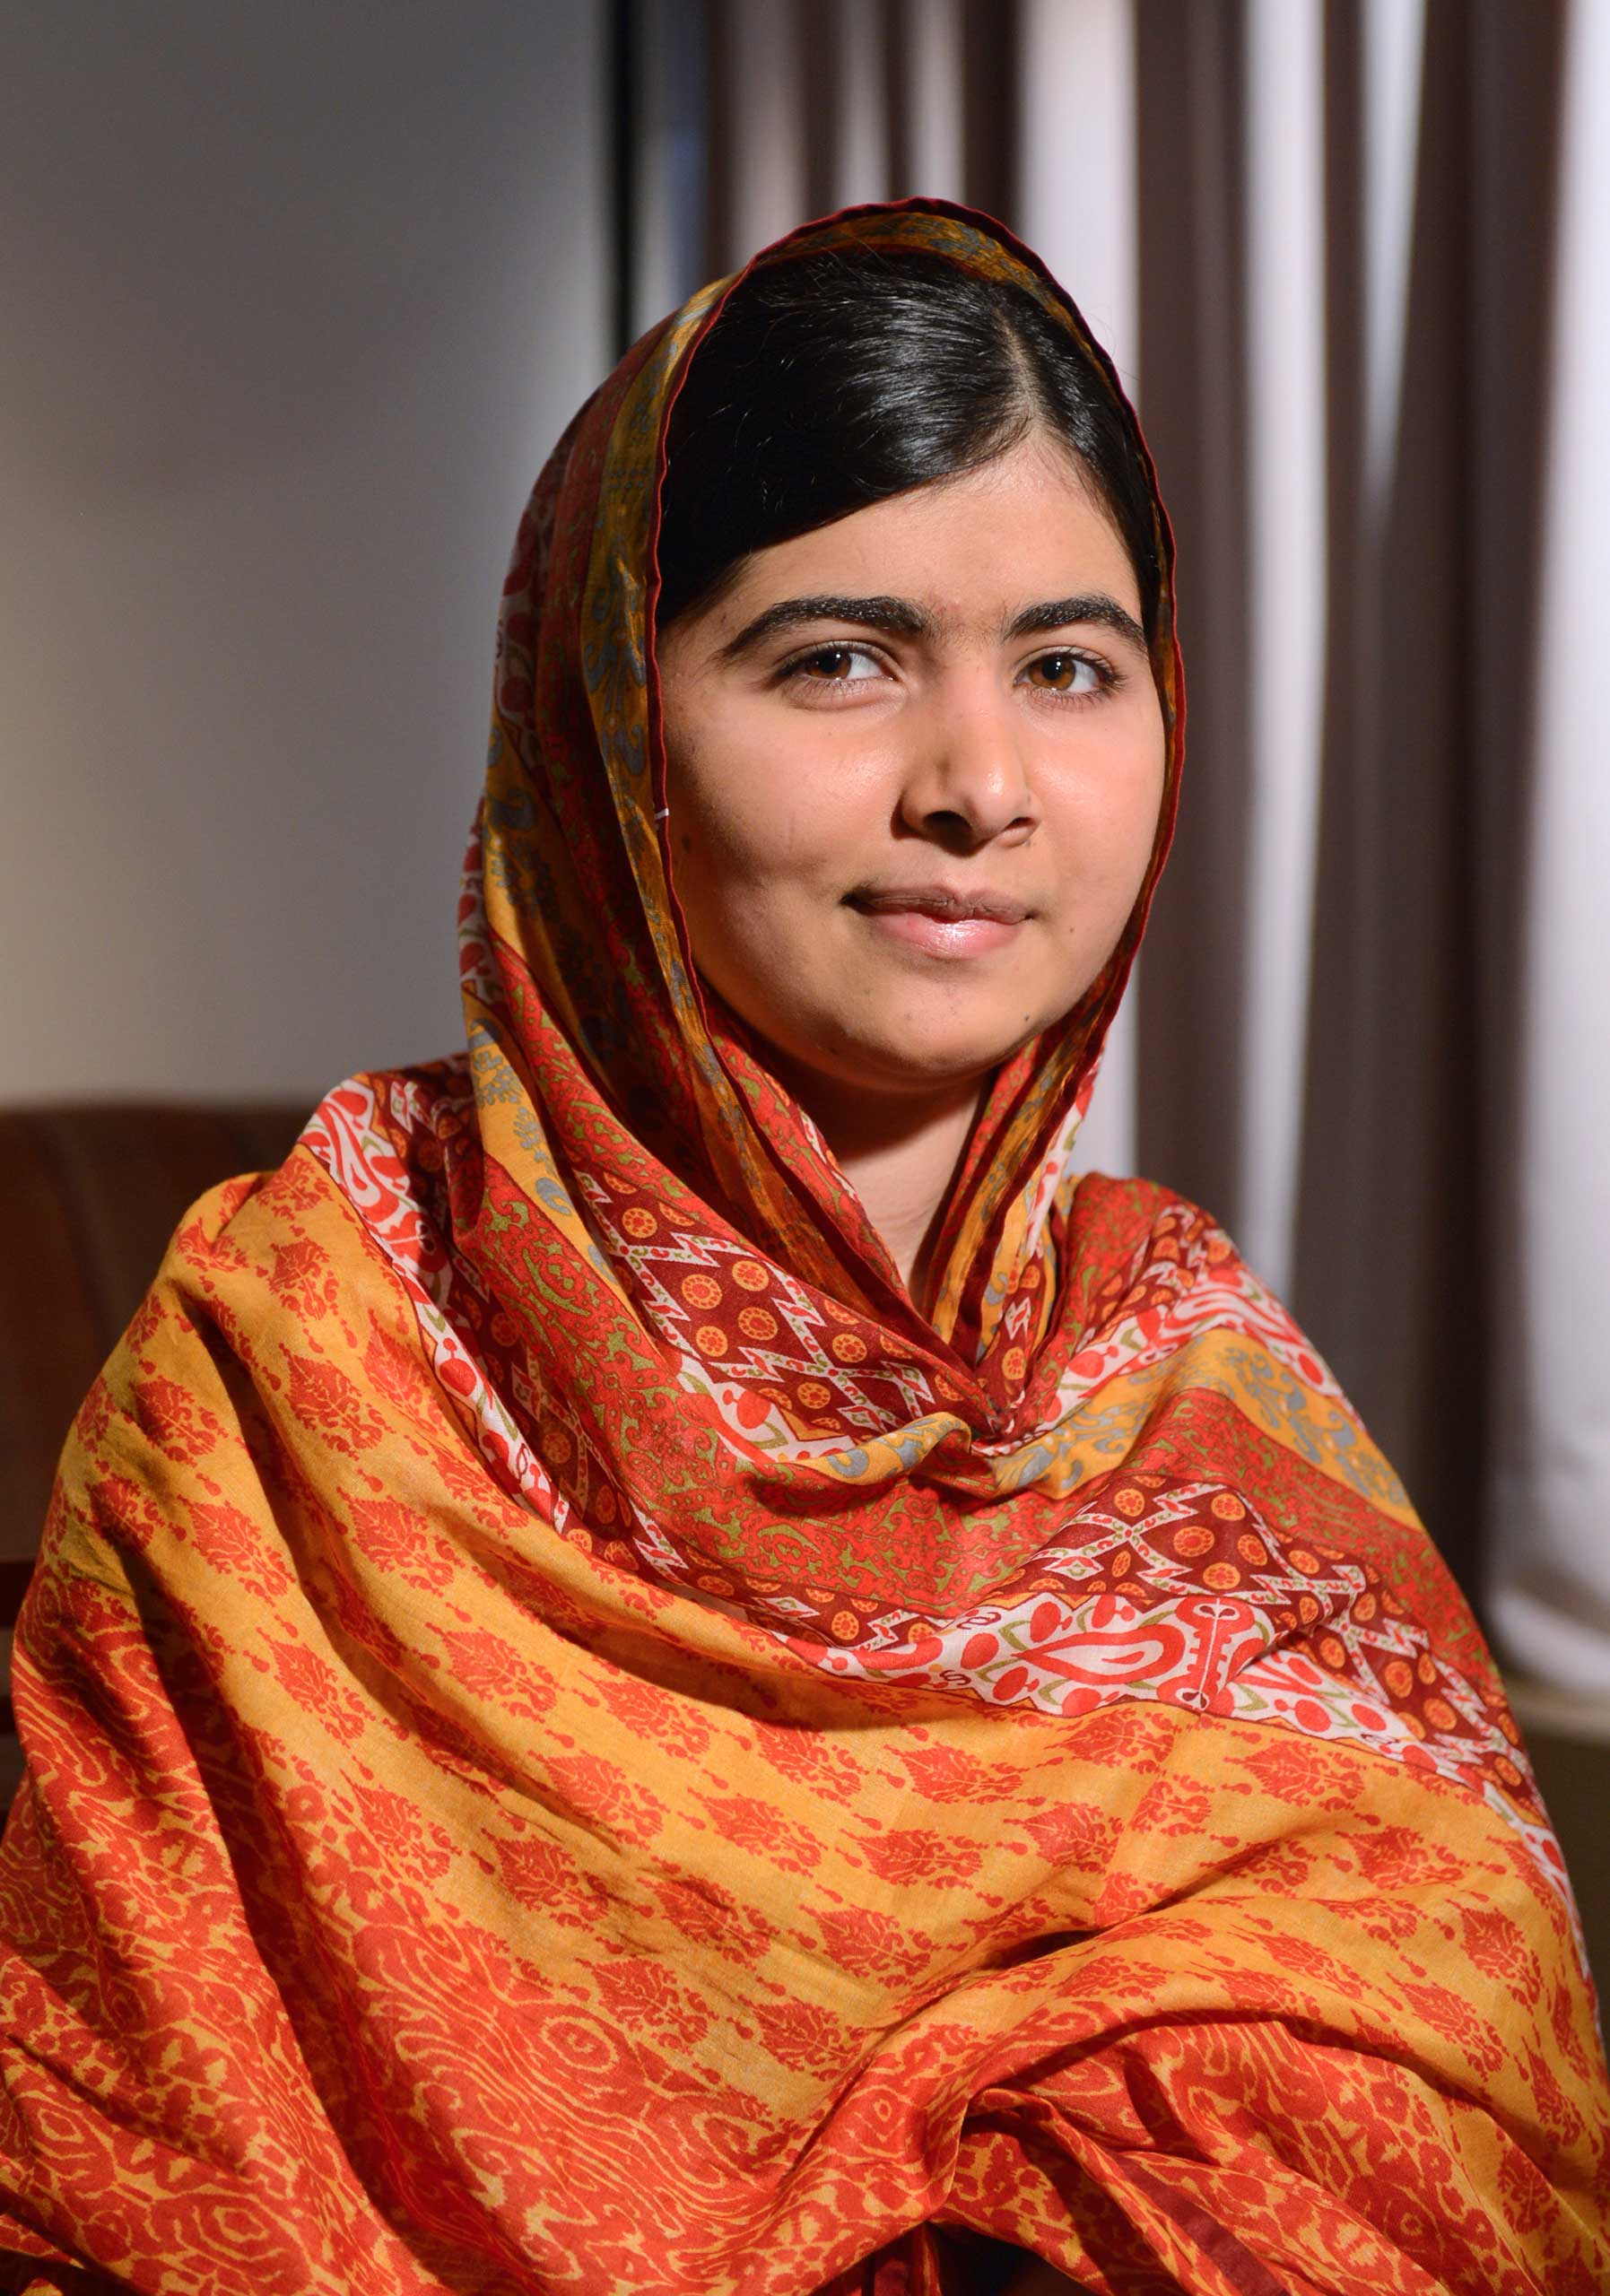 Pakistinian teenager and education activist Malala Yousafzai is interviewed on GOOD MORNING AMERICA, airing MONDAY, AUG. 18 (7:00-9:00am, ET) on the ABC Television Network. (Photo by Ida Mae Astute/ABC via Getty Images) MALALA YOUSAFZAI